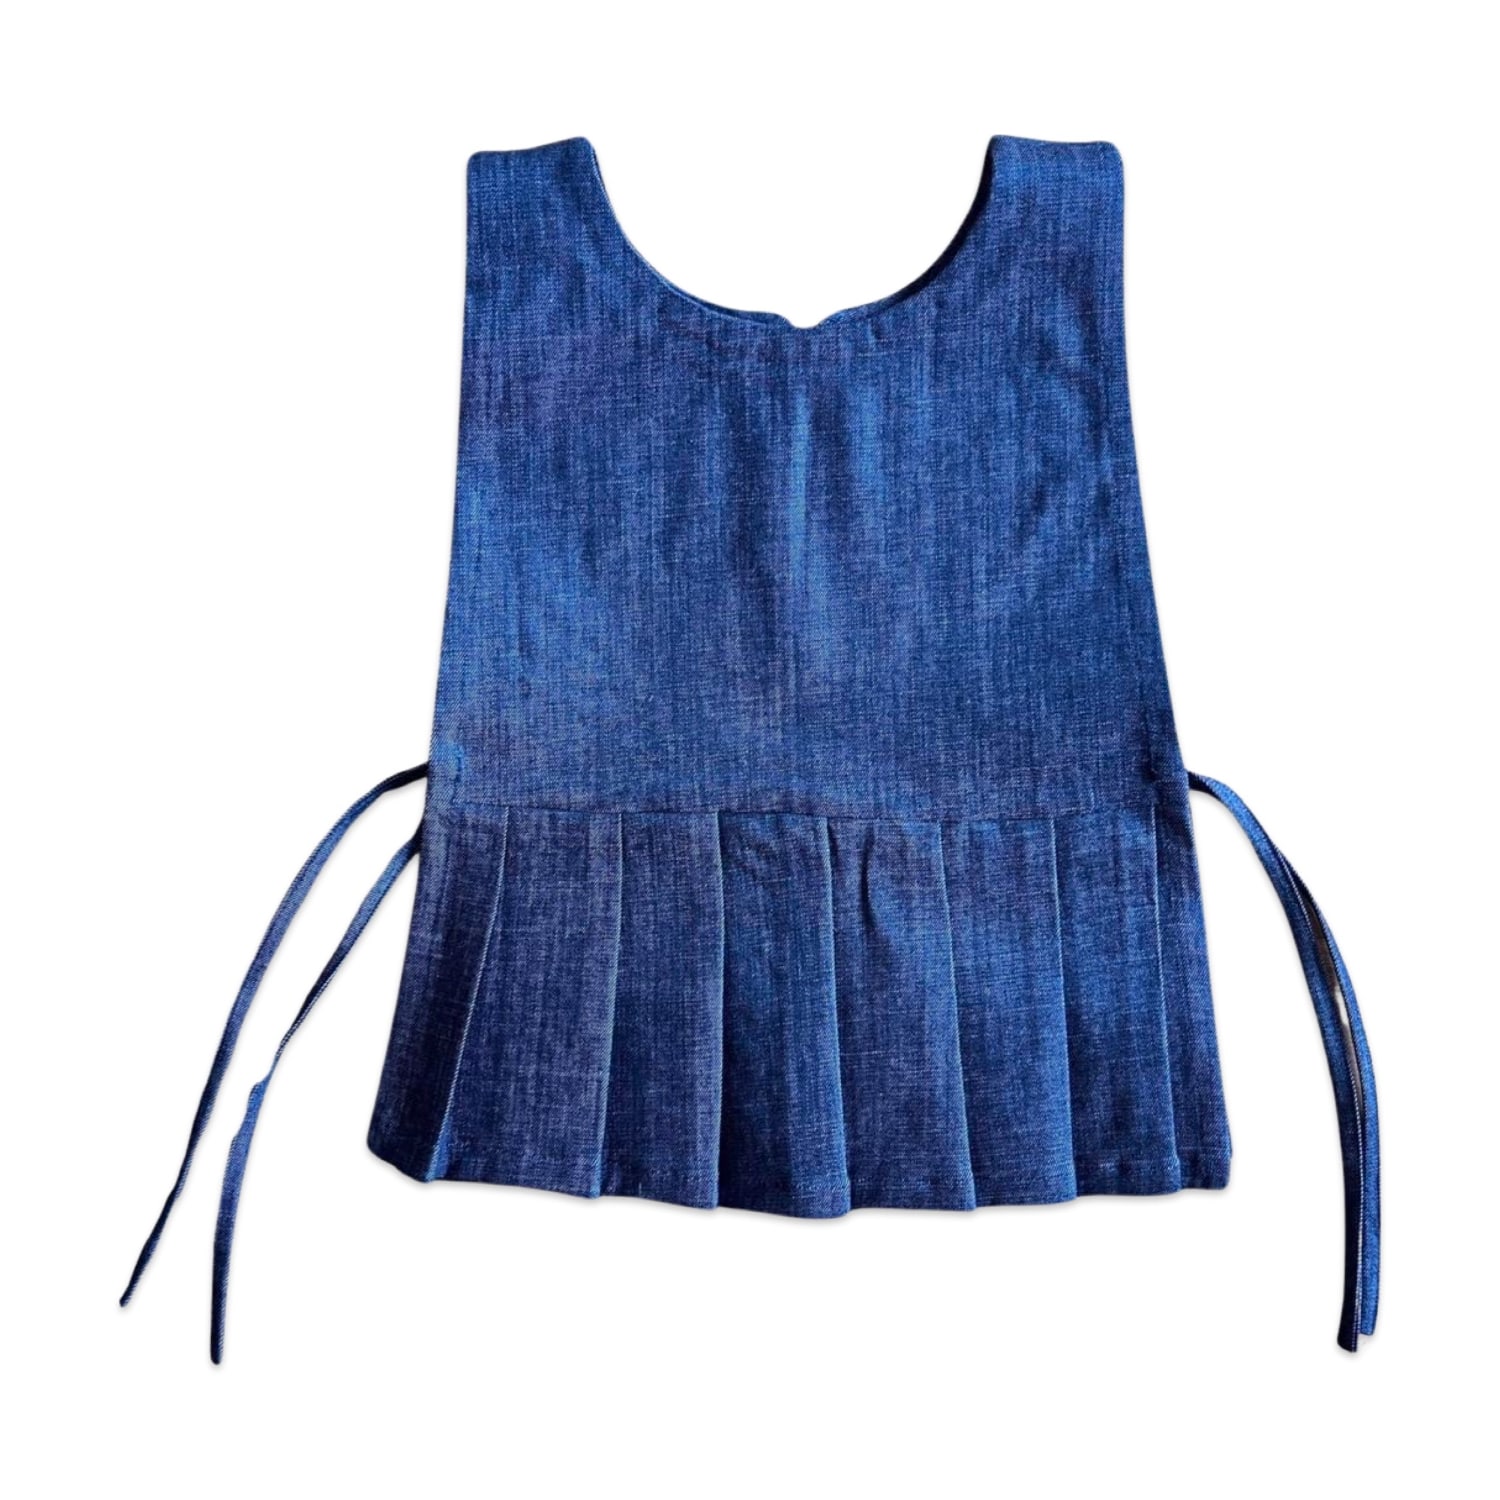 Women’s Blue Denim Vest With Pleated Details & Open Sides S/M London Atelier Byproduct